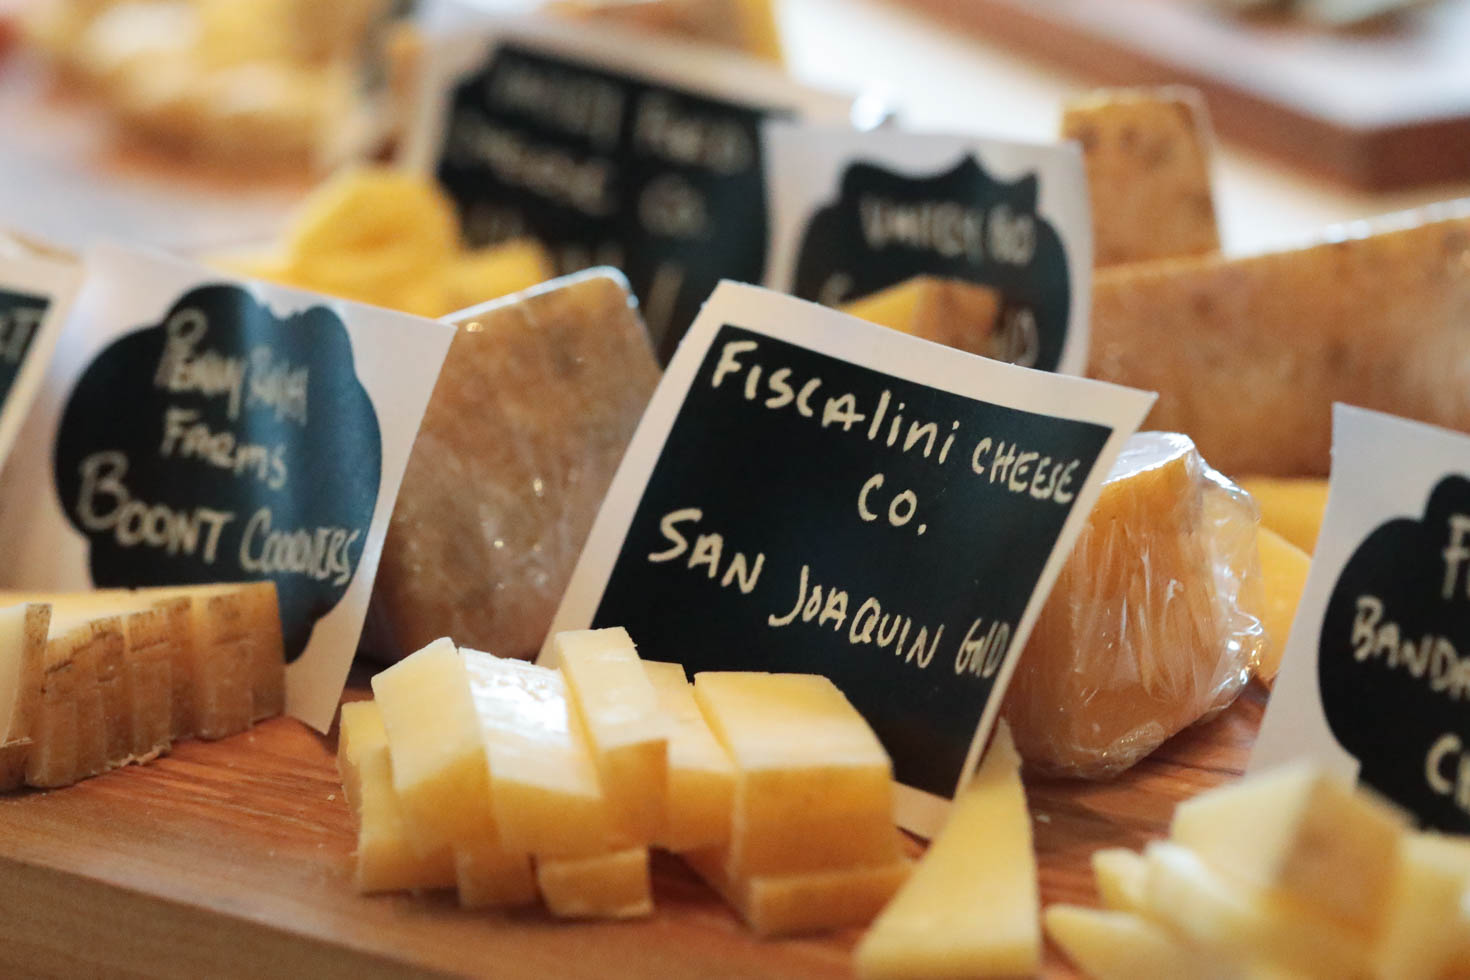 Pieces of Fiscalini Cheese Co's San Joaquin Gold cheese cut for tasting.